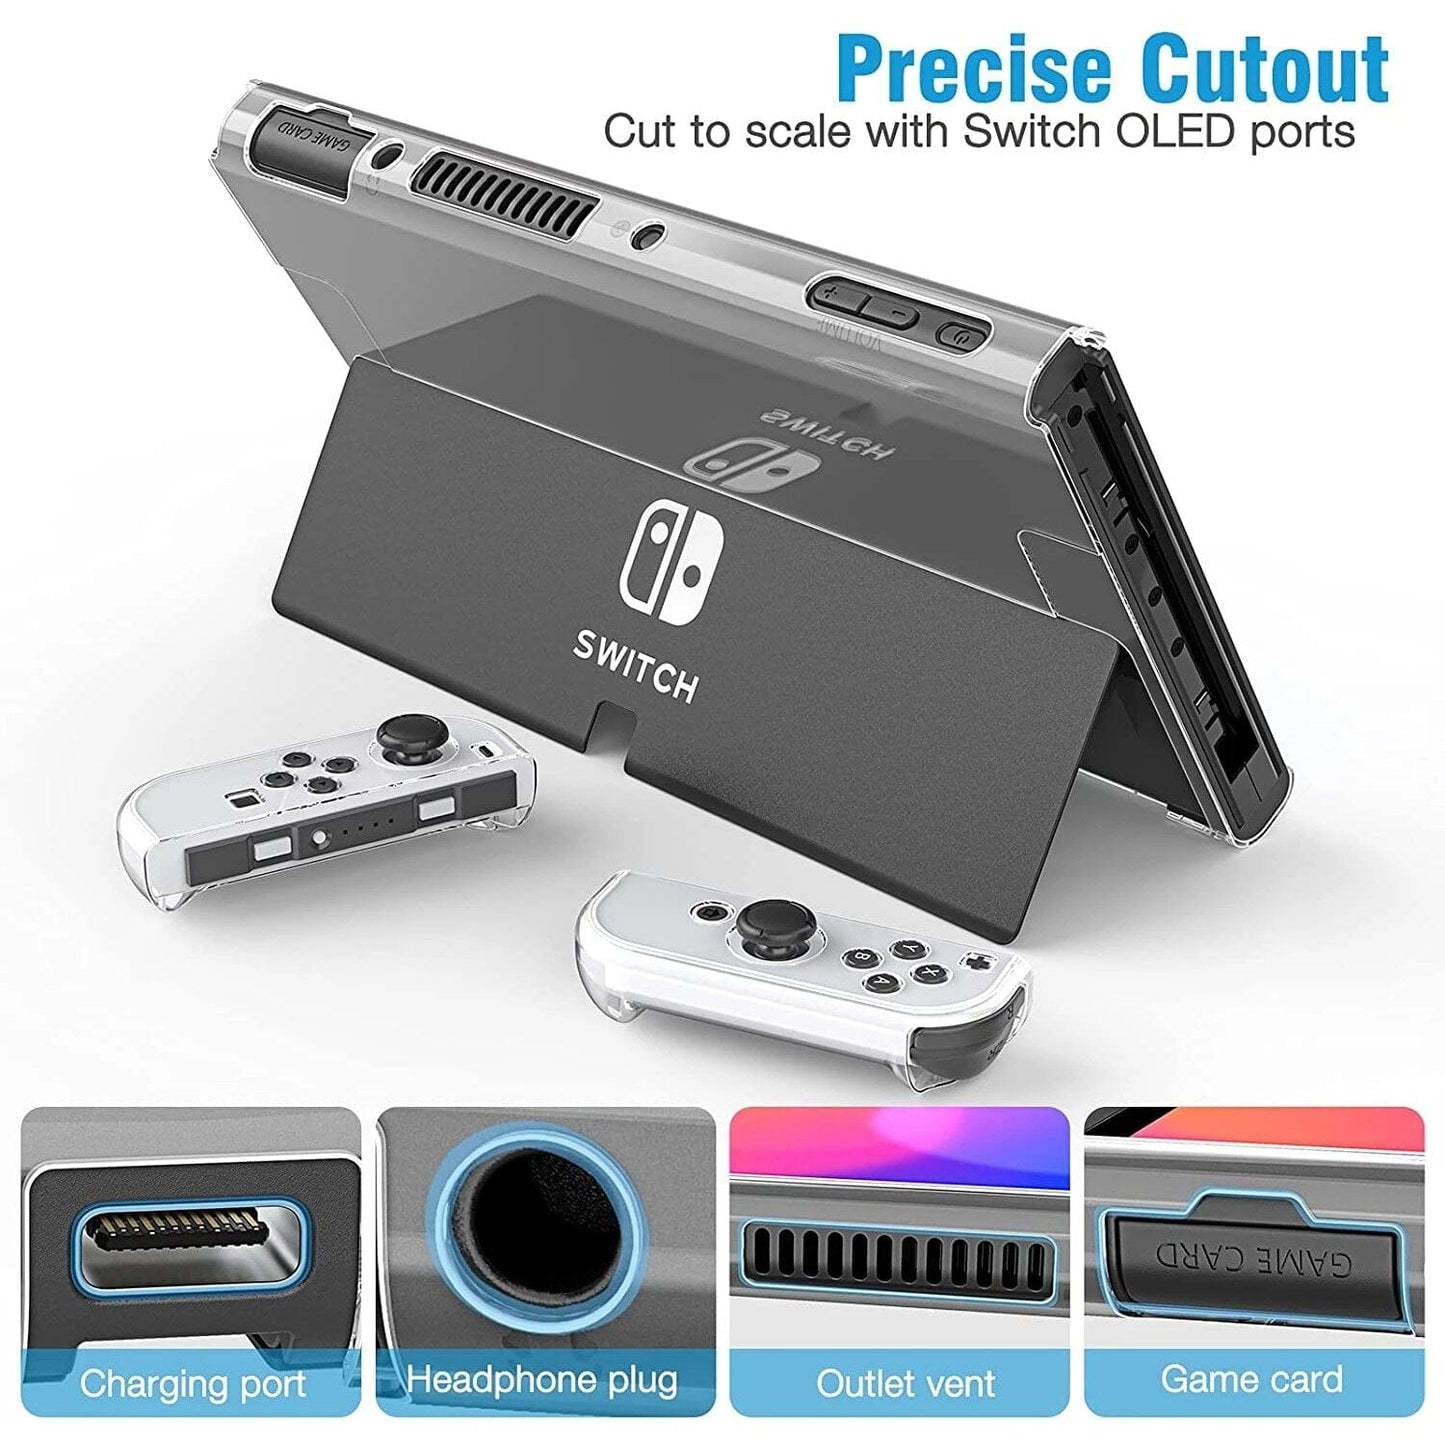 Pouch Protector Bag For Nintendo Switch & Accessories